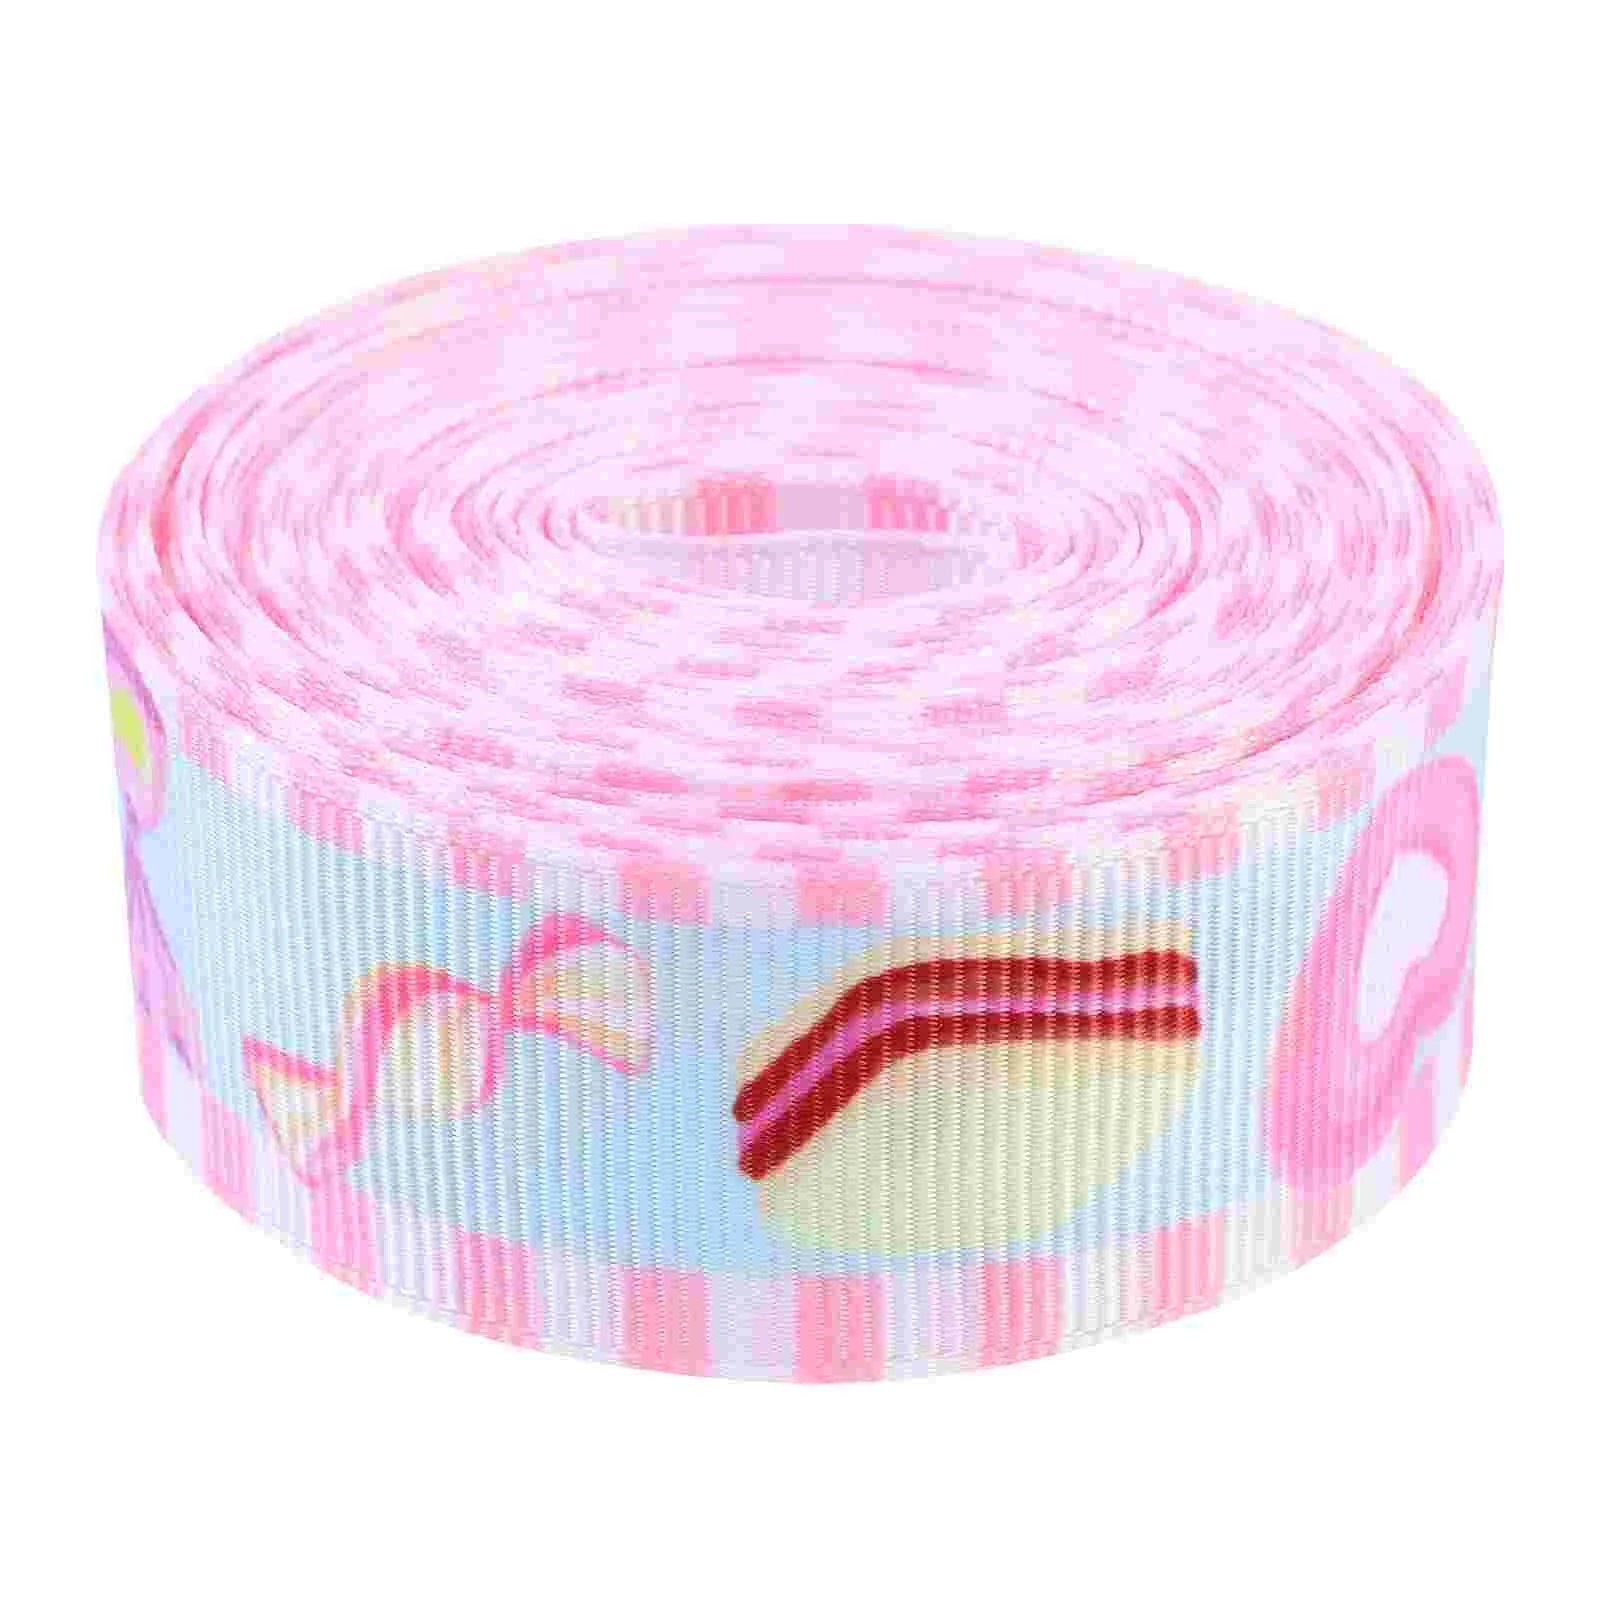 

Ribbon Grosgrain Gift Ribbons Wrapping Packing Wedding Craft Cake Roll Candy Diy Hair Party Bouquet Packaging Fabric Decorative